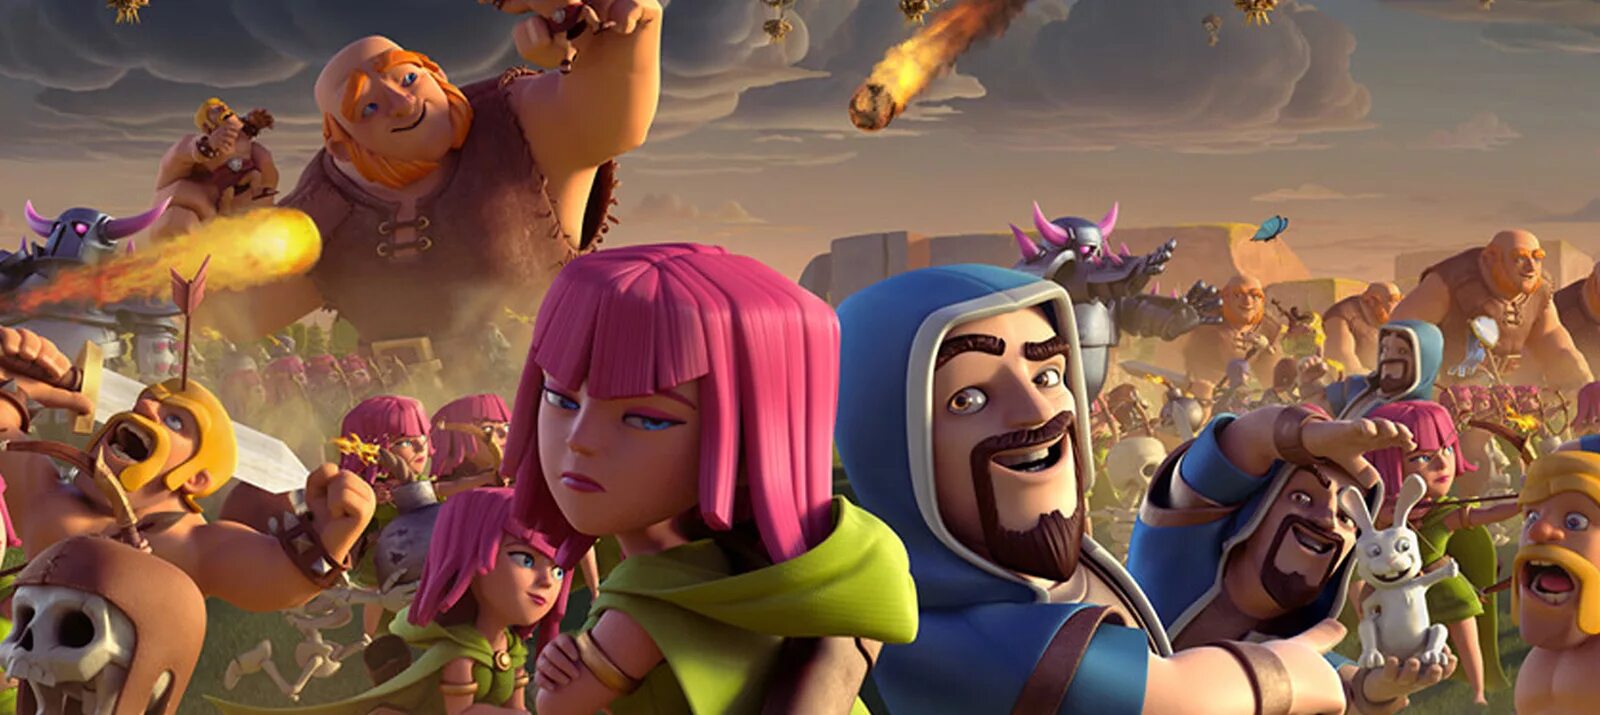 Clash of Clans. Clash of Clans Wallpaper. Clash of clans 16